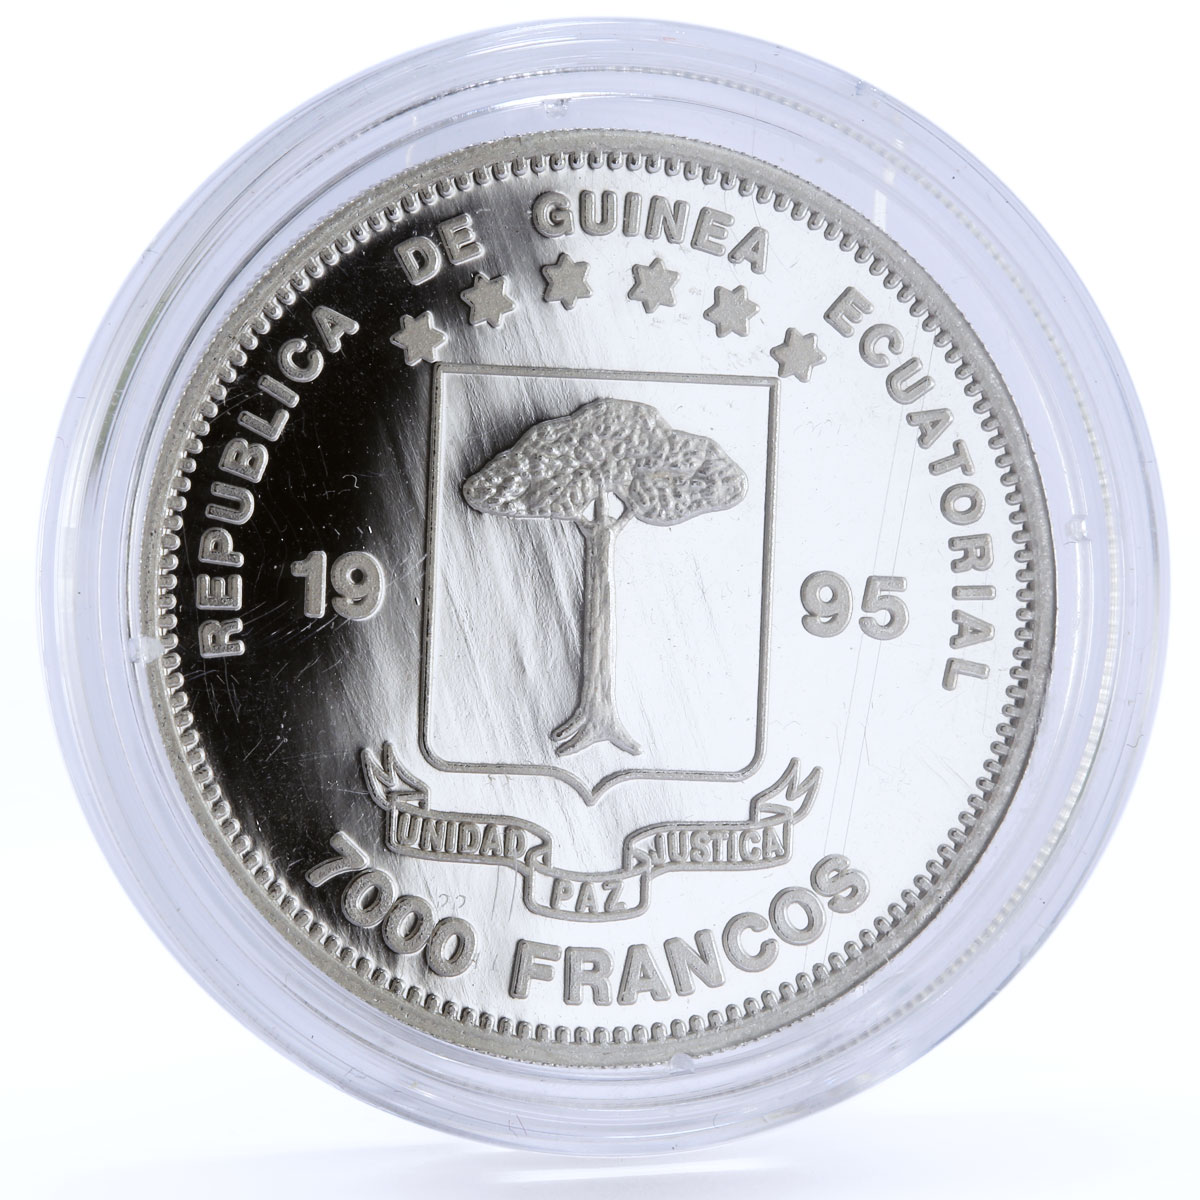 Equatorial Guinea 7000 francos 50 Years of the United Nations silver coin 1995